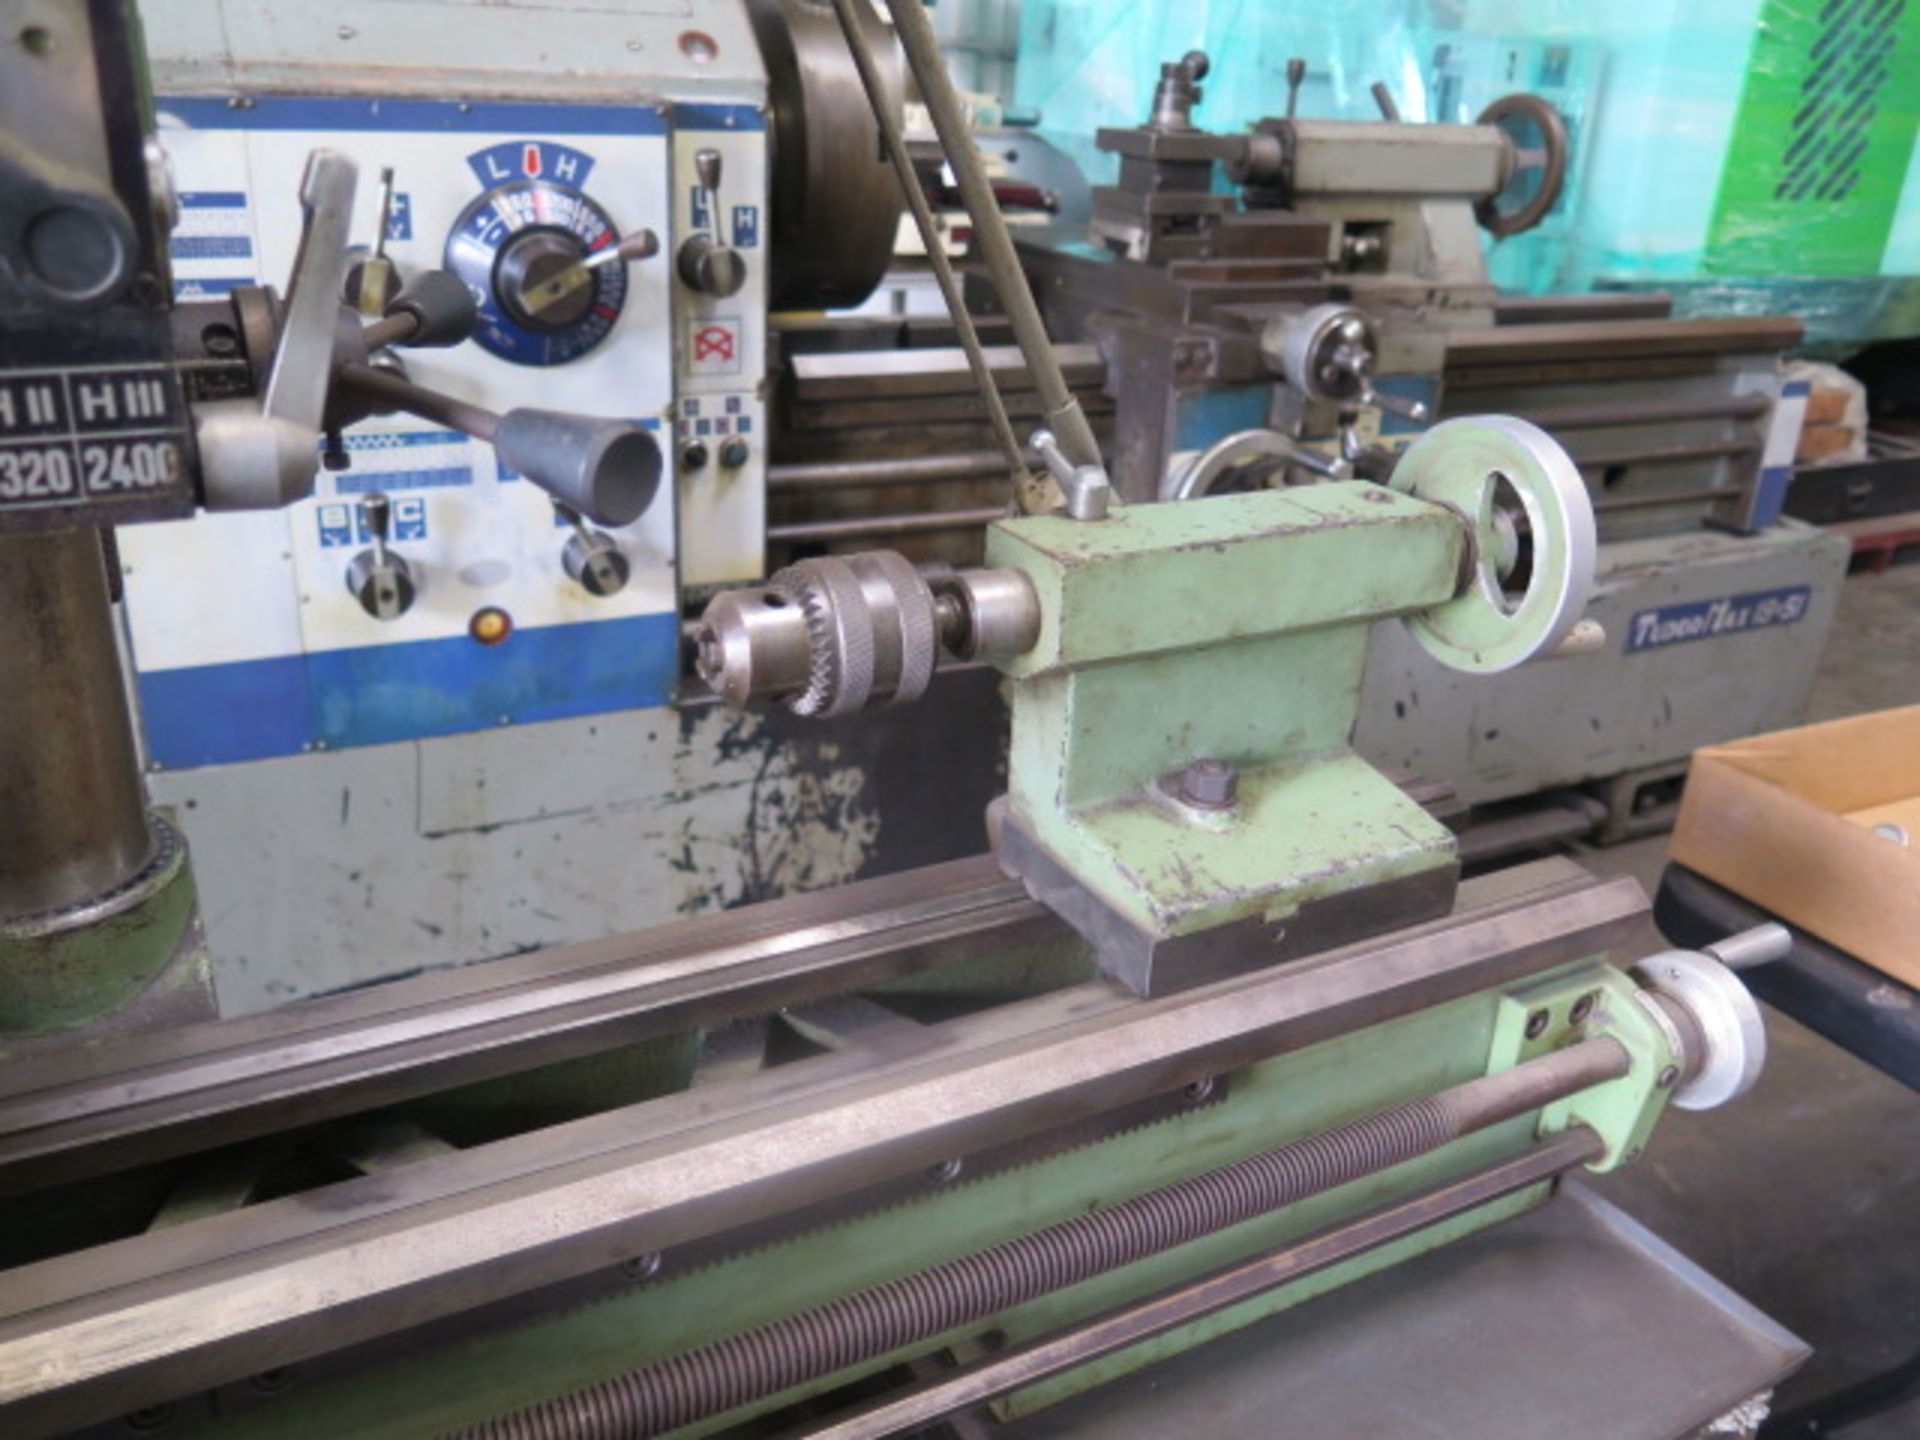 Emco “Maximat Mentor 10” Mill / Drill Machine w/ 60-2500 RPM (SOLD AS-IS - NO WARRANTY) - Image 10 of 16